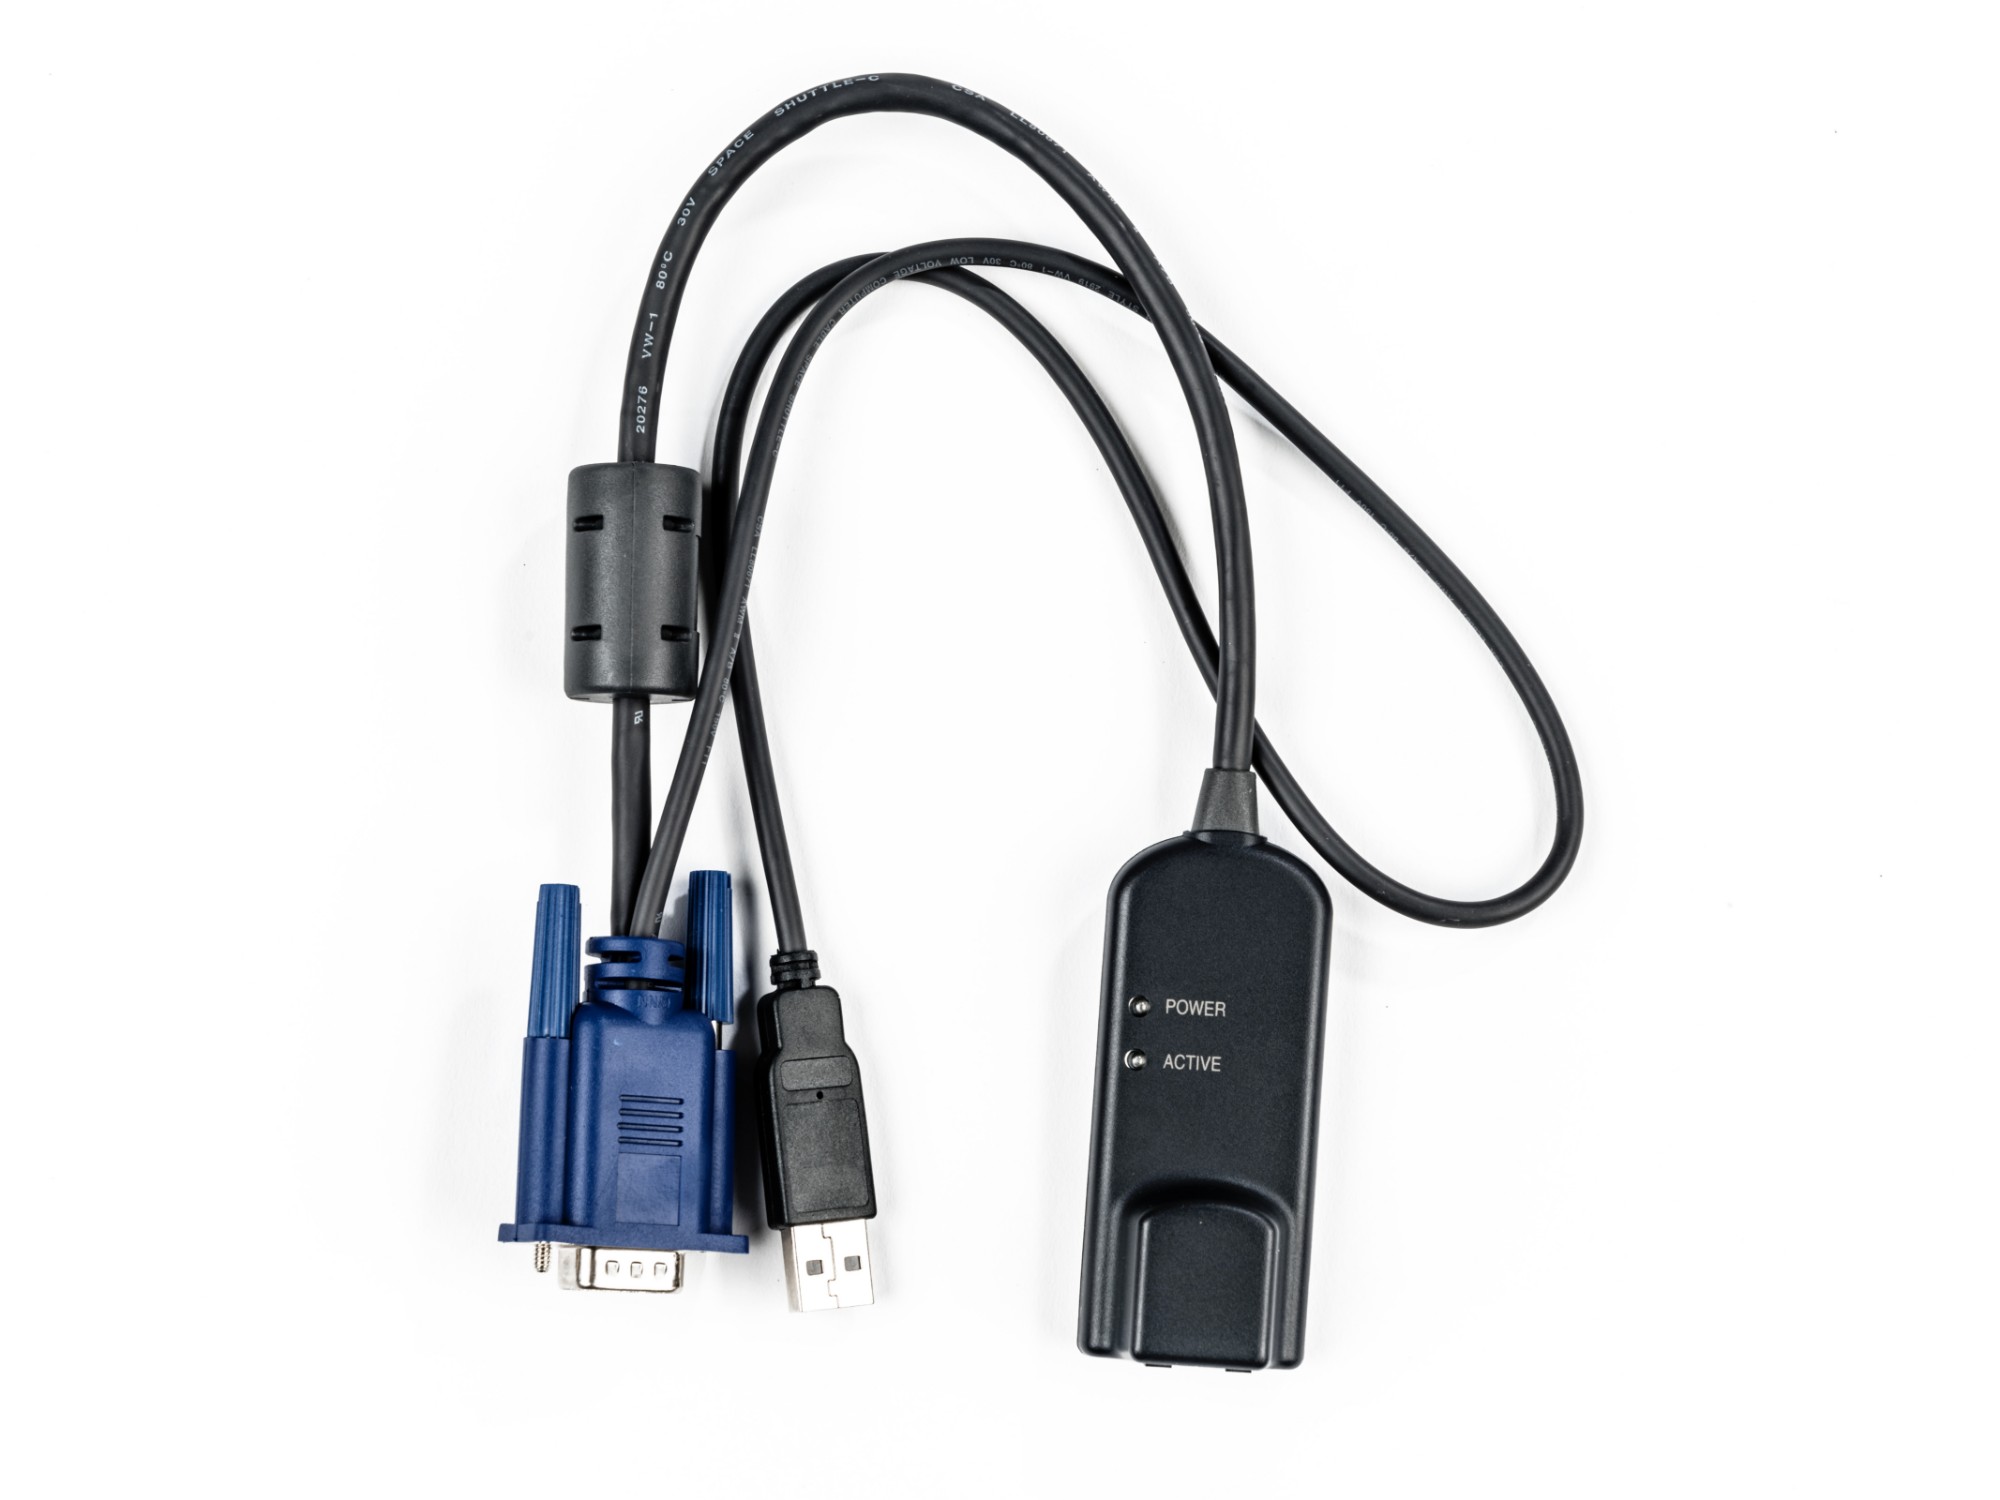 Photos - Cable (video, audio, USB) Vertiv Avocent MPUIQ-VMCHS cable interface/gender adapter VGA  (D-Sub)